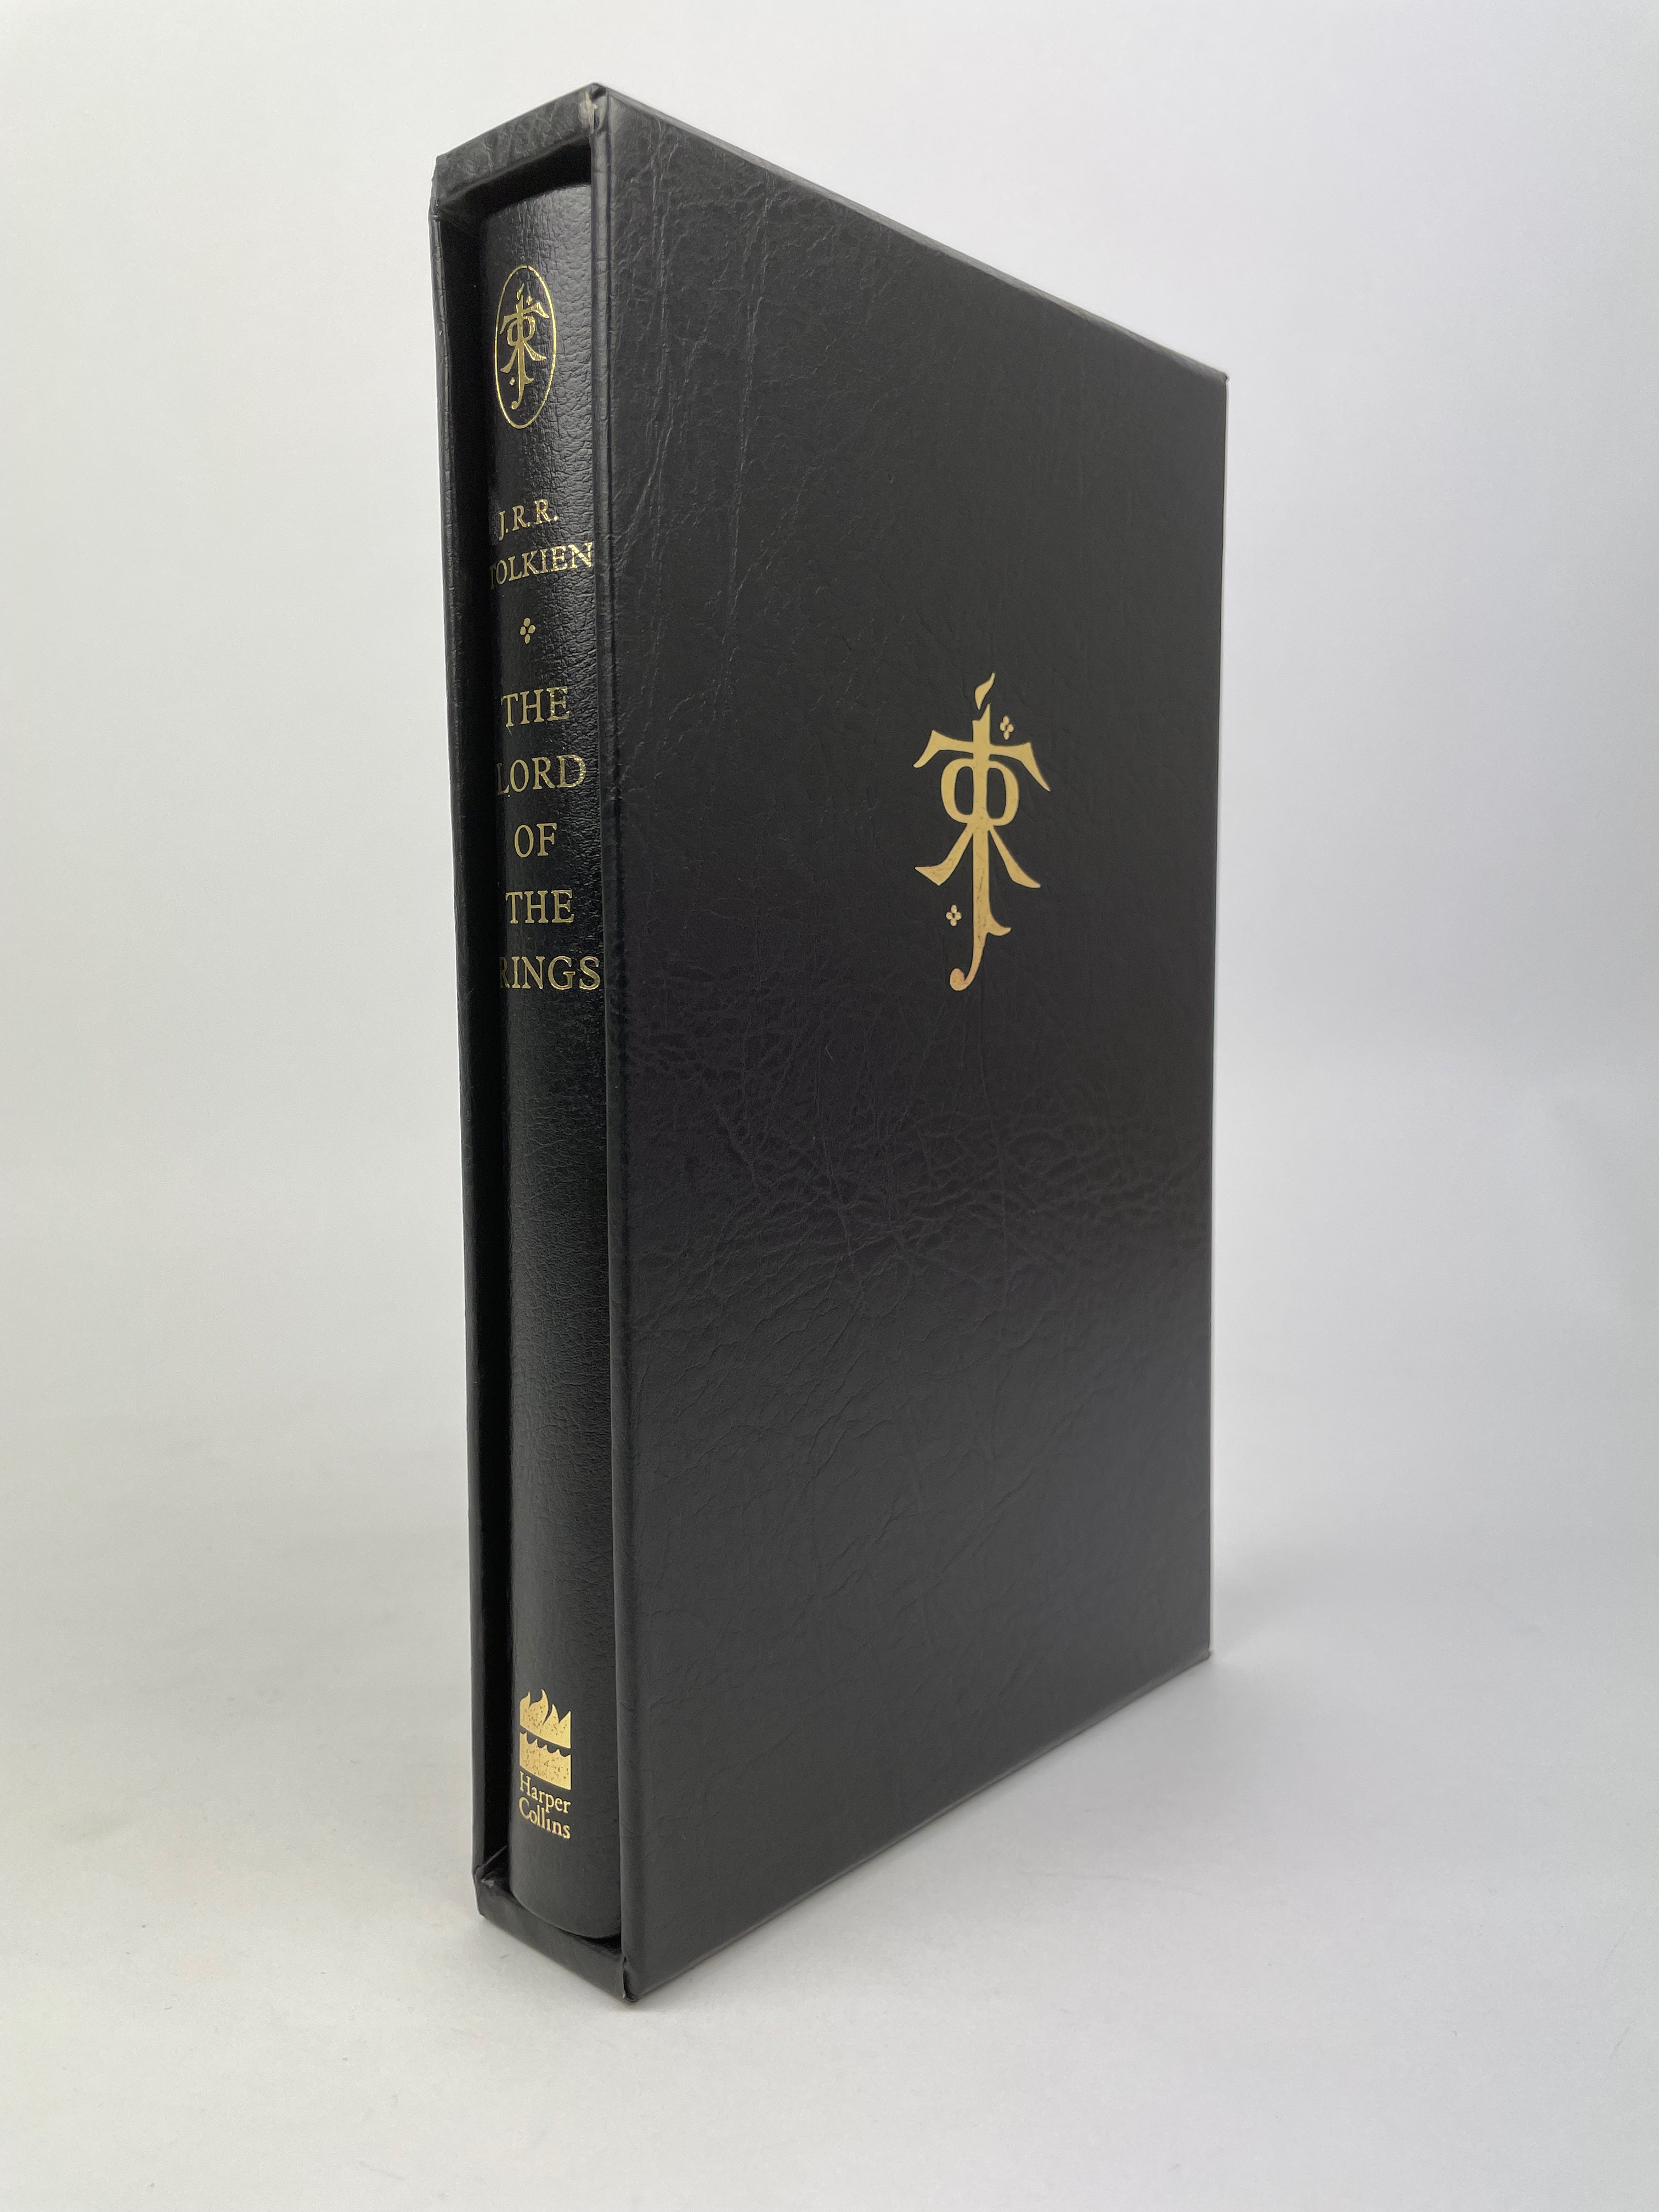 Lord of the Rings, Harper Collins Deluxe Limited Edition of 2002 - Black Leather 1